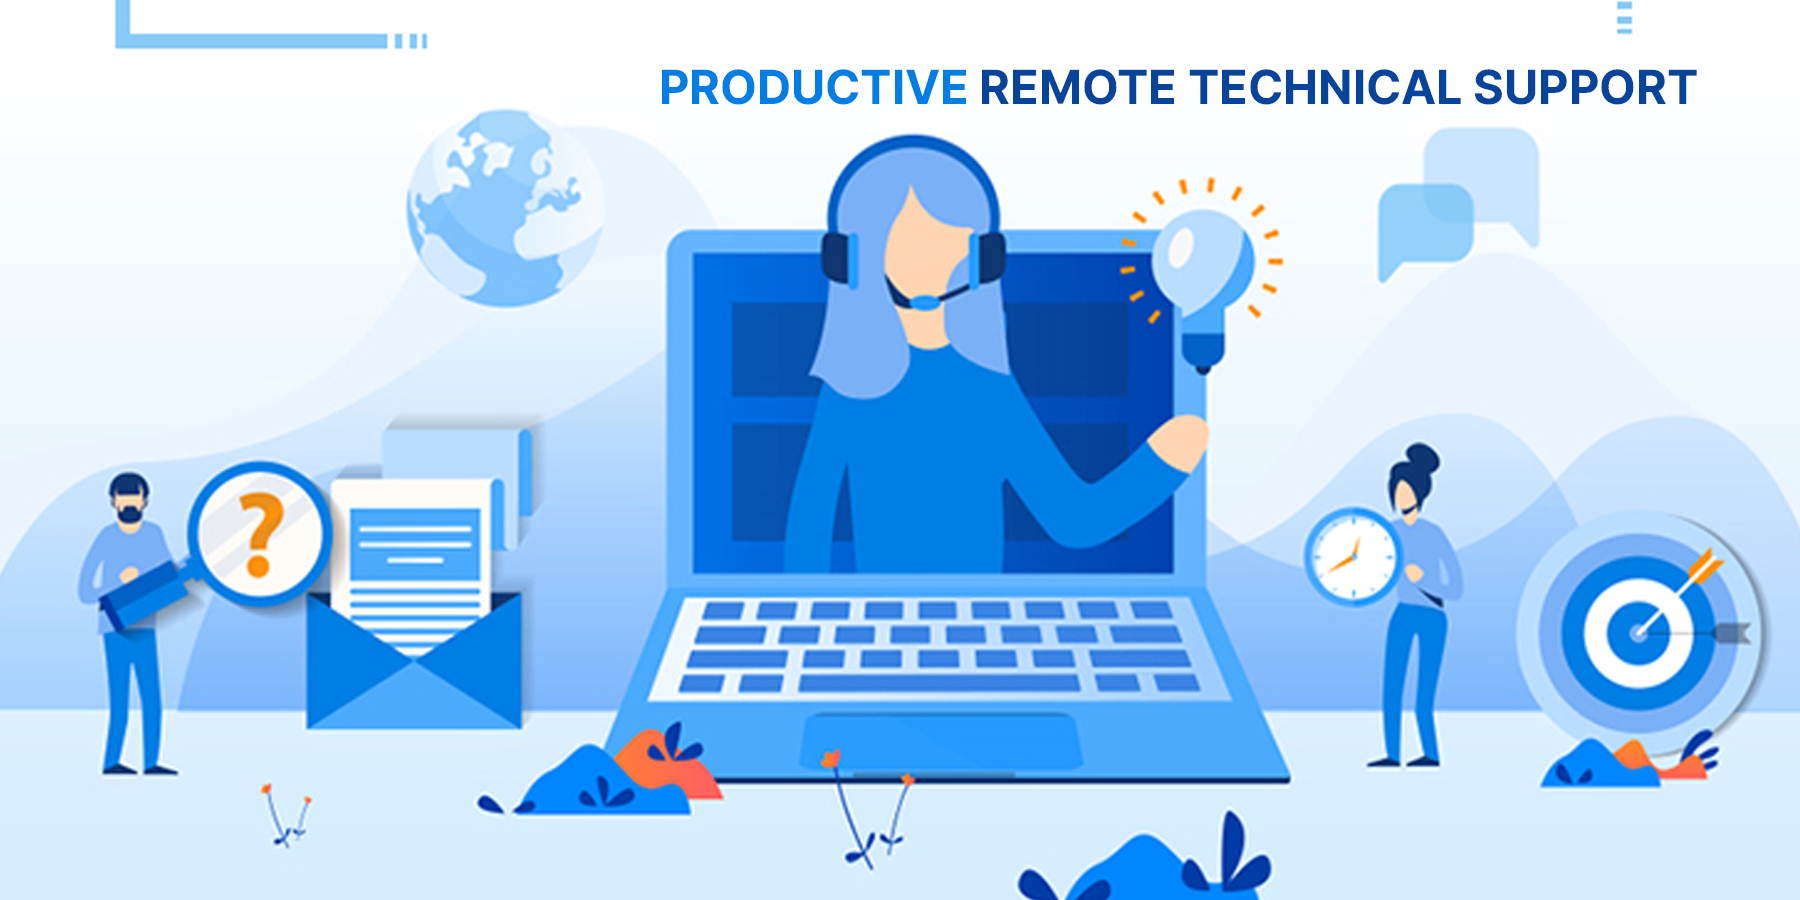 How to Build a Productive Remote Technical Support Team from Scratch